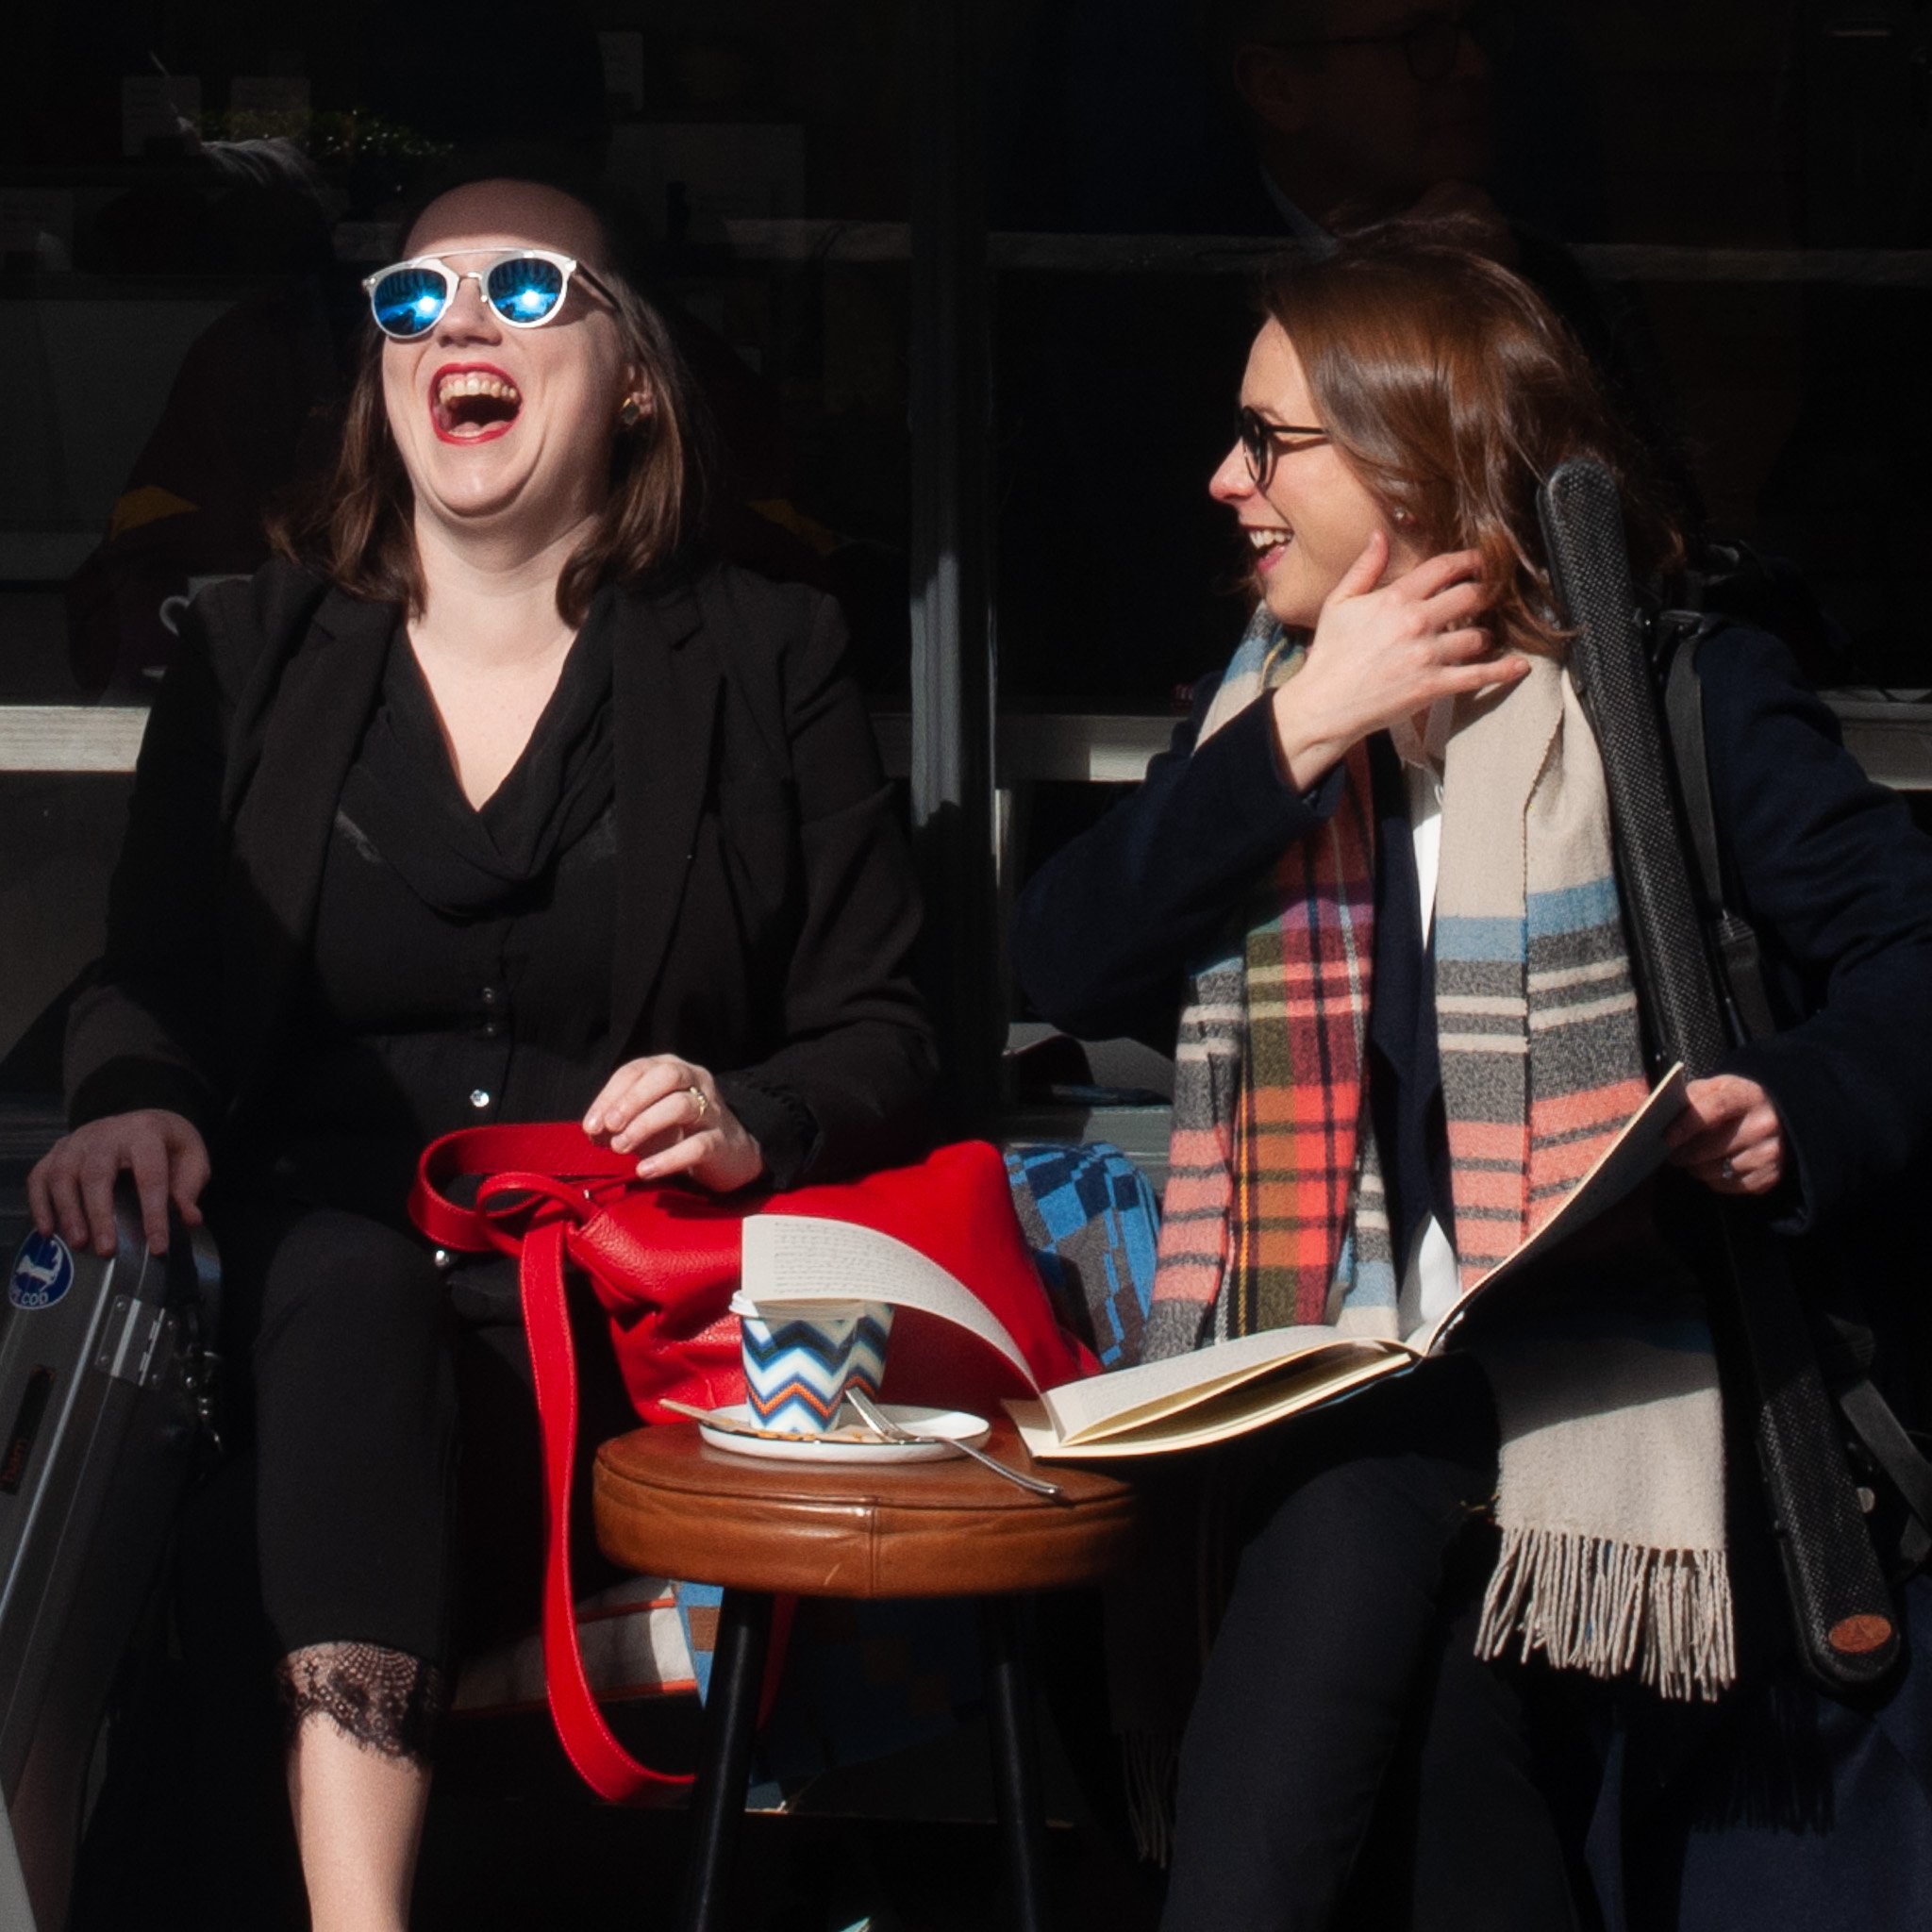 Paula and Rachel laughing. Paula is wearing blue-lensed sunglasses and concert blacks, her left hand resting on a red leather bag with a cup of coffee in front of it. Rachel is turned to face Paula, wearing concert blacks and a dark coat, with a light-coloured scarf with irregular coloured stripes. She is holding an open score.